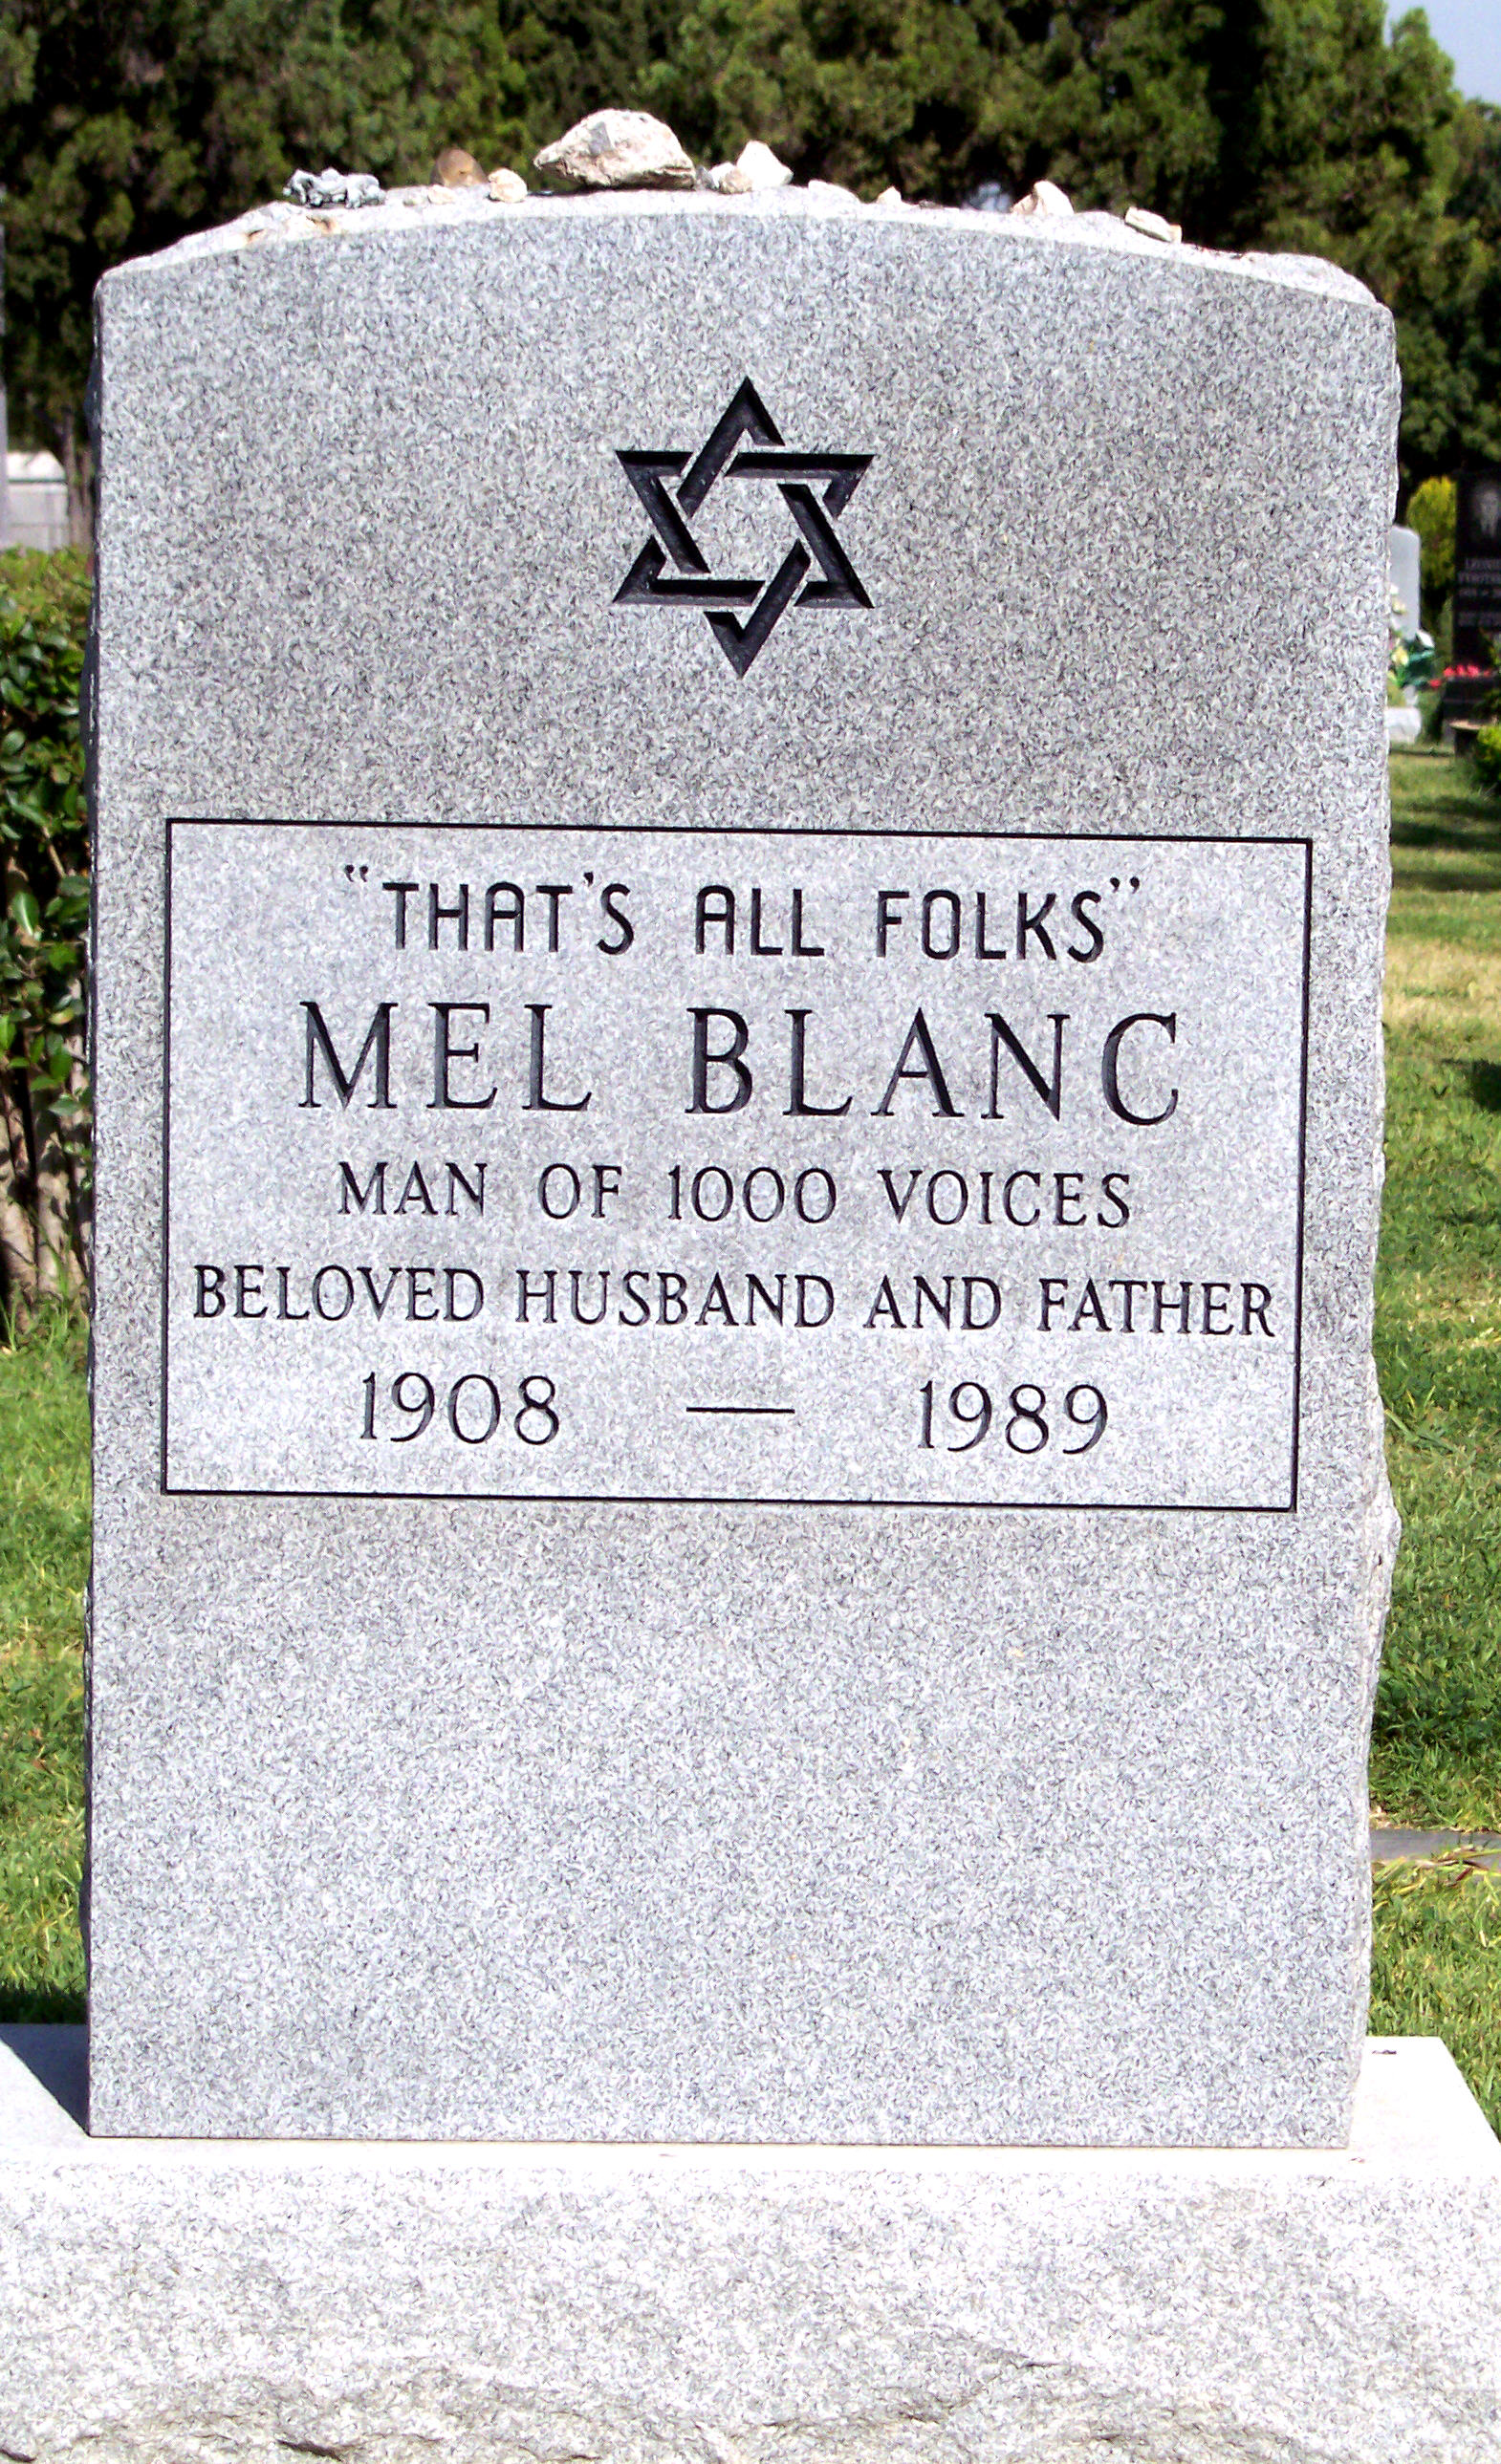 How Being Bugs Bunny Saved Mel Blanc's Life After A Near-Fatal Accident